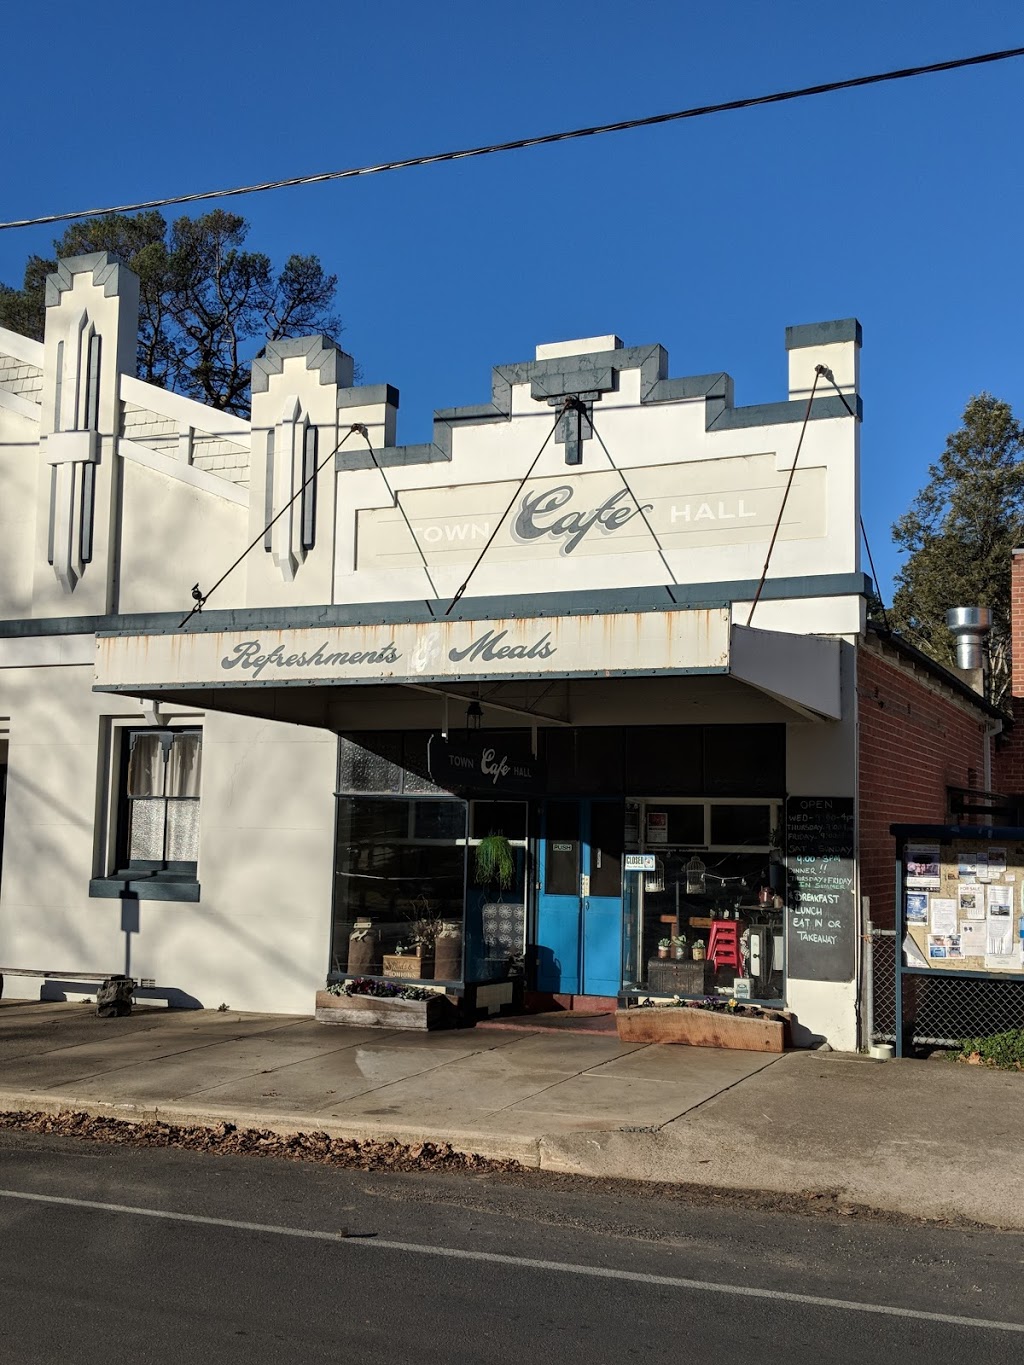 Town Hall Cafe Candelo | William St, Candelo NSW 2550, Australia | Phone: 0418 322 933